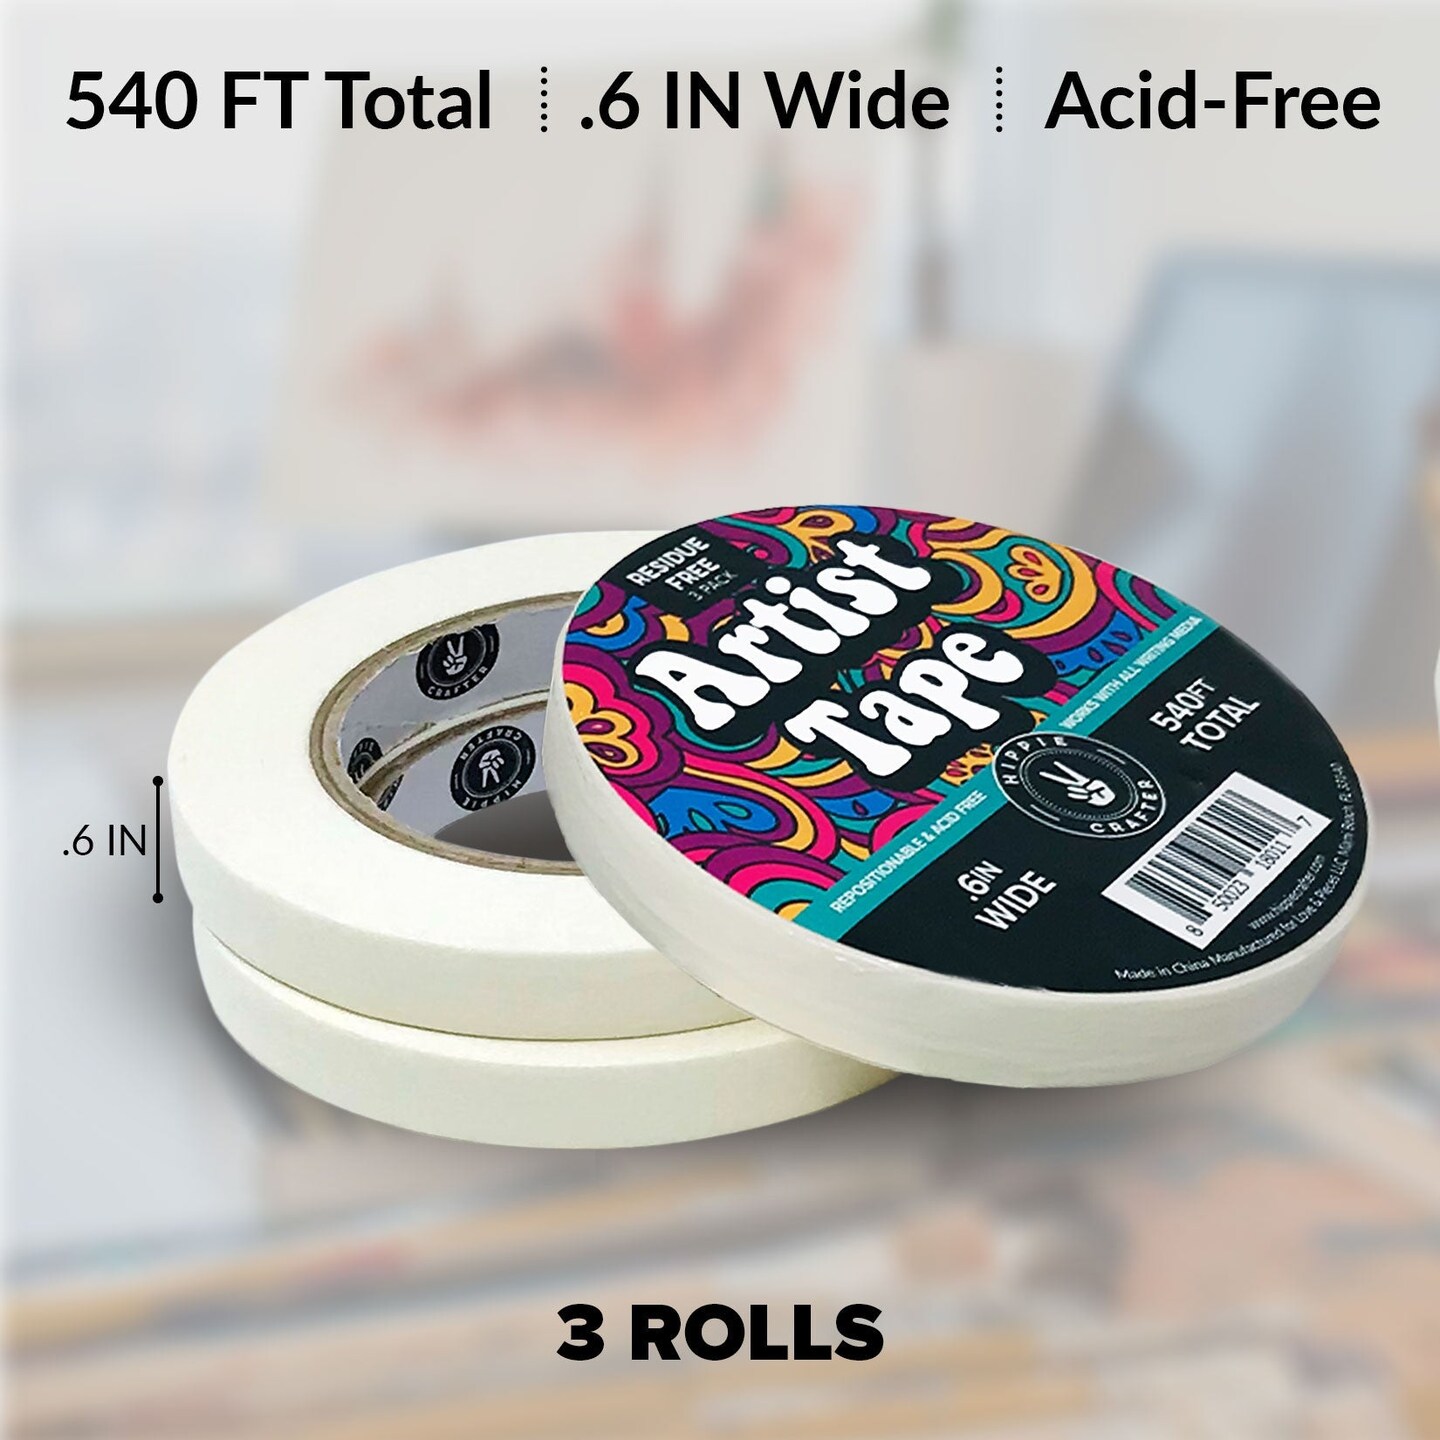 Youking White Masking Tape 2 Inch Wide, Easy Tear Painter’S Tape. 2Rolls  Paintin